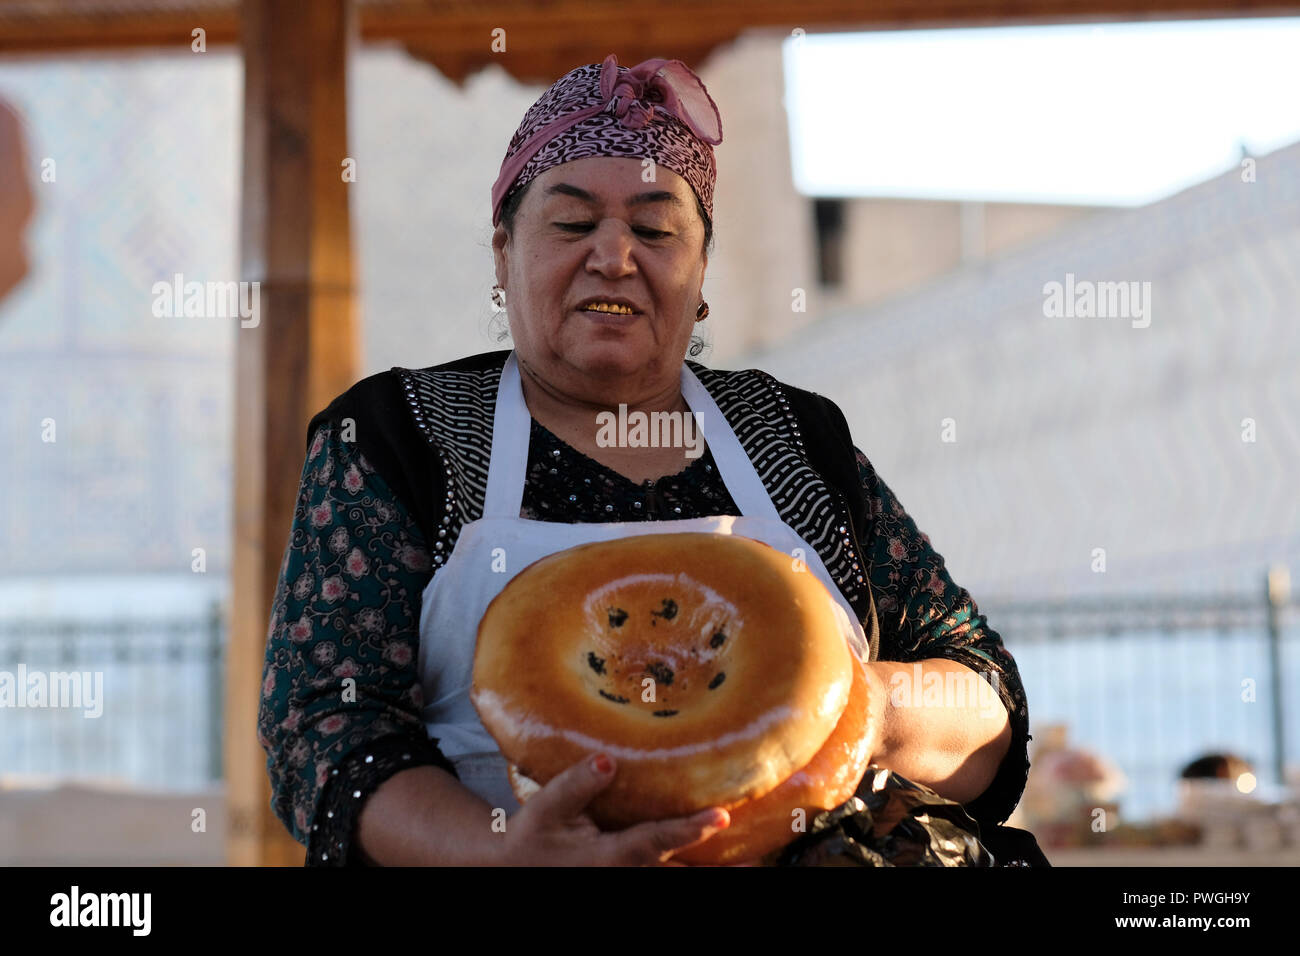 A vendor with capped gold teeth selling traditional Bukhara-style non or naan oven-baked flatbread in Siyob Bazaar also called Siab Bazaar, the largest bazaar in the city of Samarkand alternatively Samarqand in Uzbekistan. Replacing natural teeth with gold implants or caps was once a status symbol and prestige in Uzbekistan and other countries of Central Asia. However, the younger generation seldom follows this tradition. Stock Photo